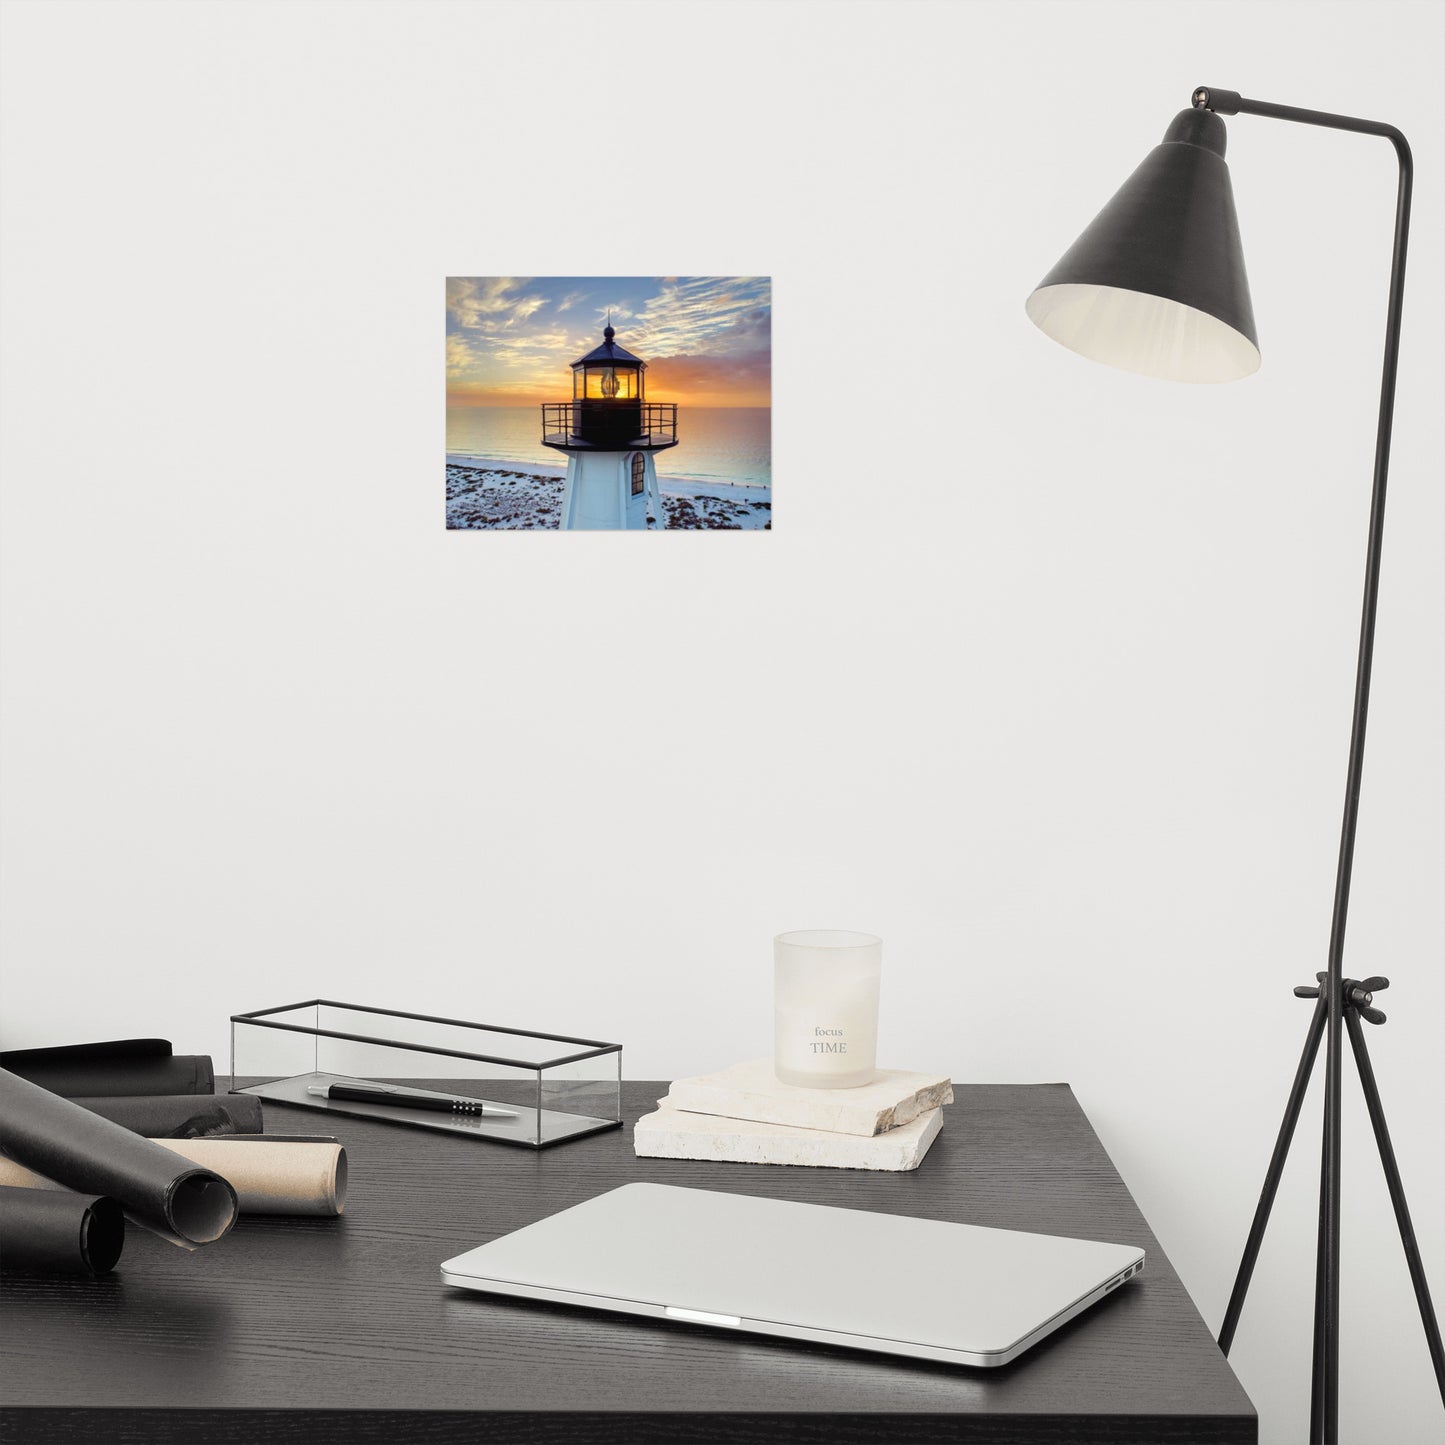 St Mark Lighthouse at Sunset Coastal Architectural Photograph Loose Unframed Wall Art Print